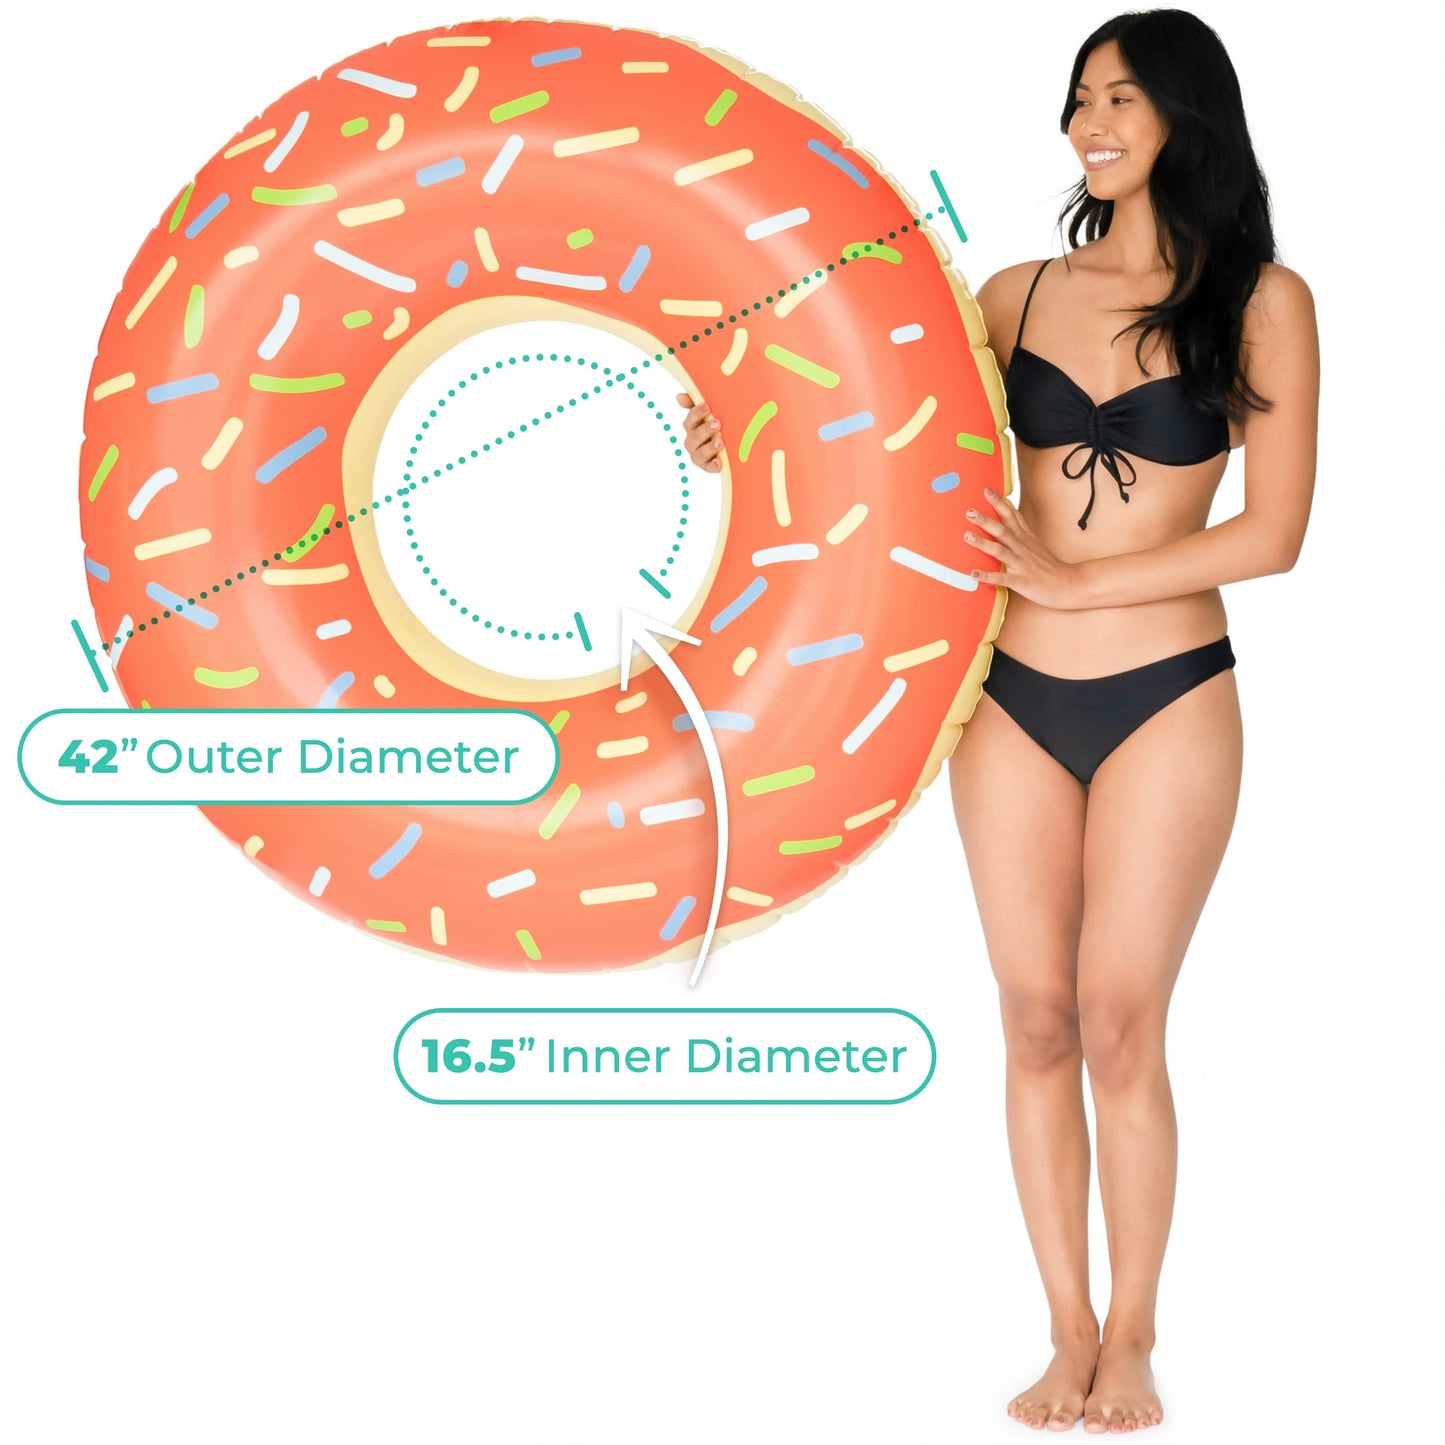 Greenco Giant Inflatable Donut with Sprinkles Float, Large Inflatable Donut Pool Float for Kids & Adults, Summer Fun for Pool, Lake, Beach, Party, Lounge